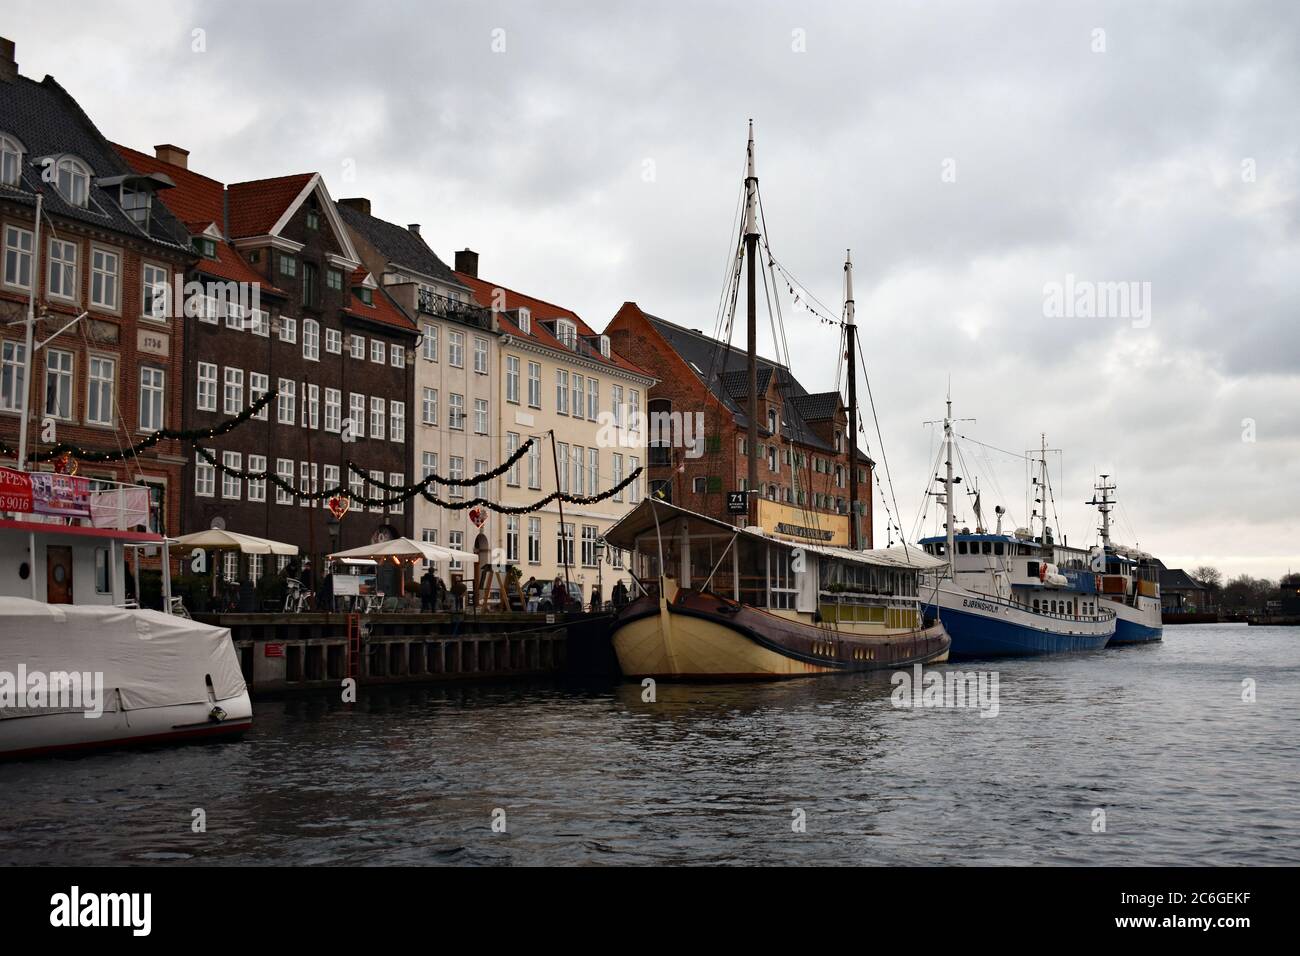 The north side of Nyhavn Canal looking out towards the main canal.  Grey, cloudy skies.  Sail boats are moored against the side of the canal. Stock Photo